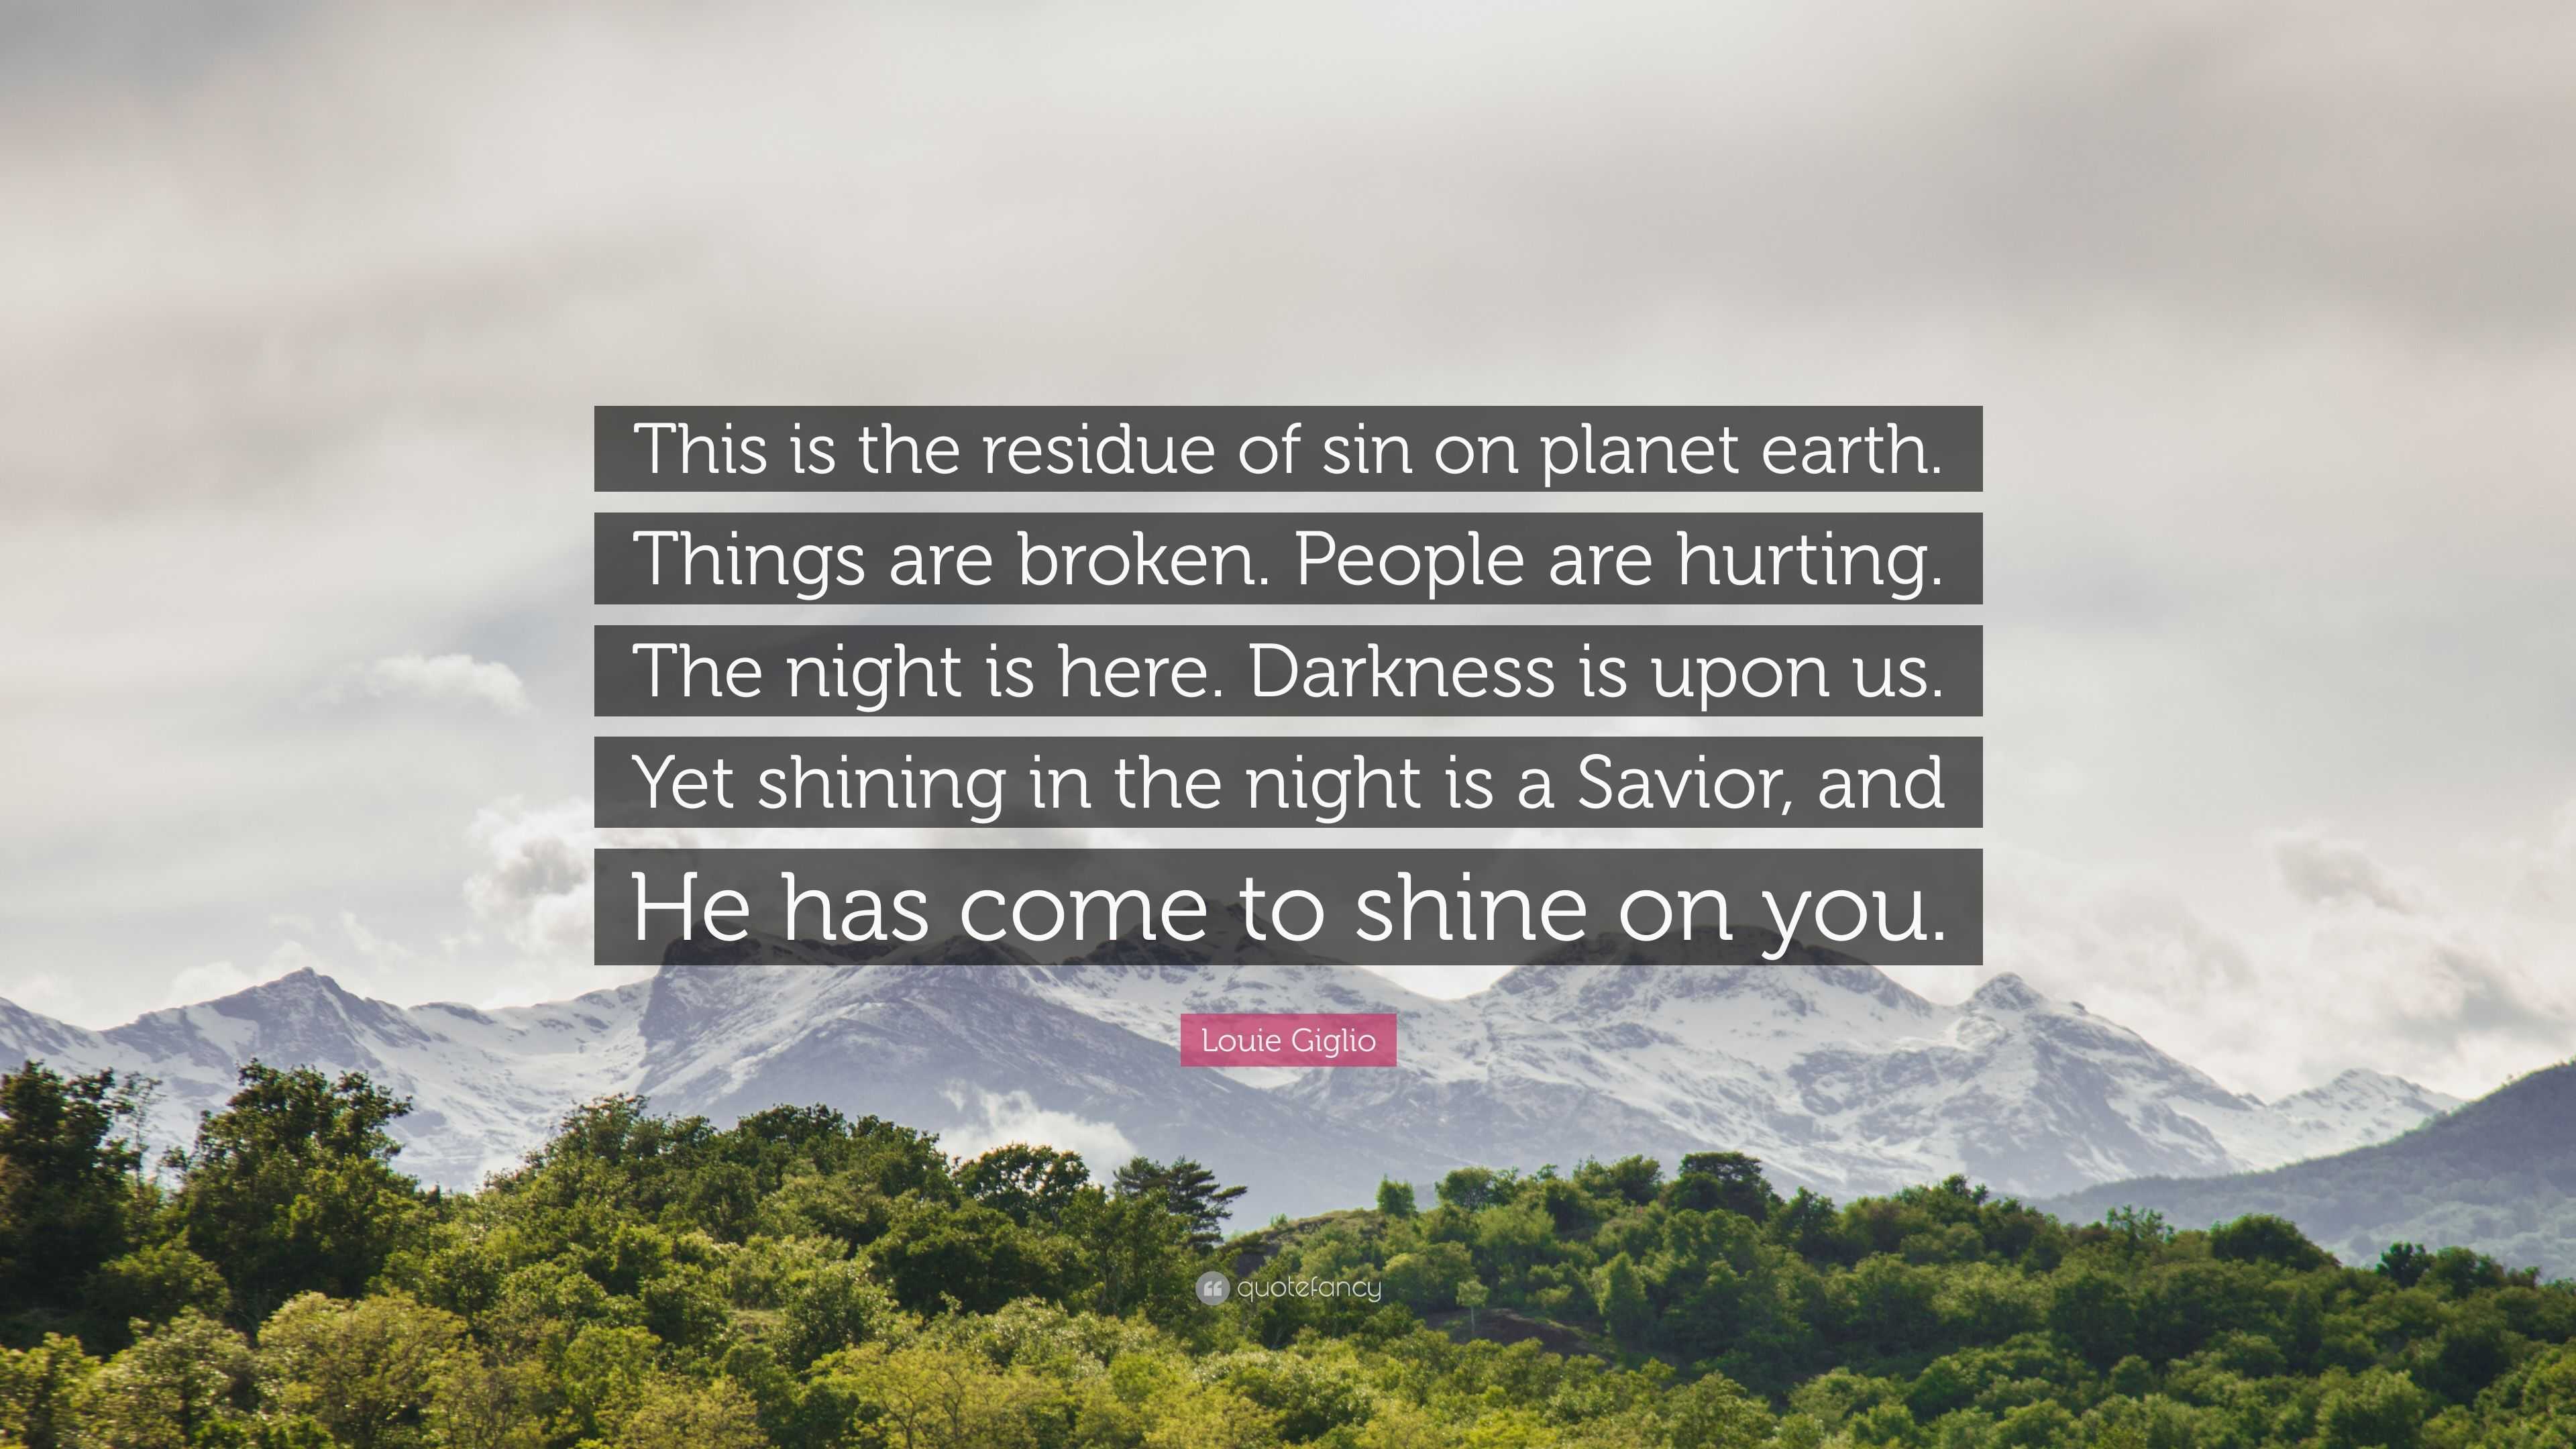 Louie Giglio Quote: “This is the residue of sin on planet earth. Things are  broken. People are hurting. The night is here. Darkness is upon u...”